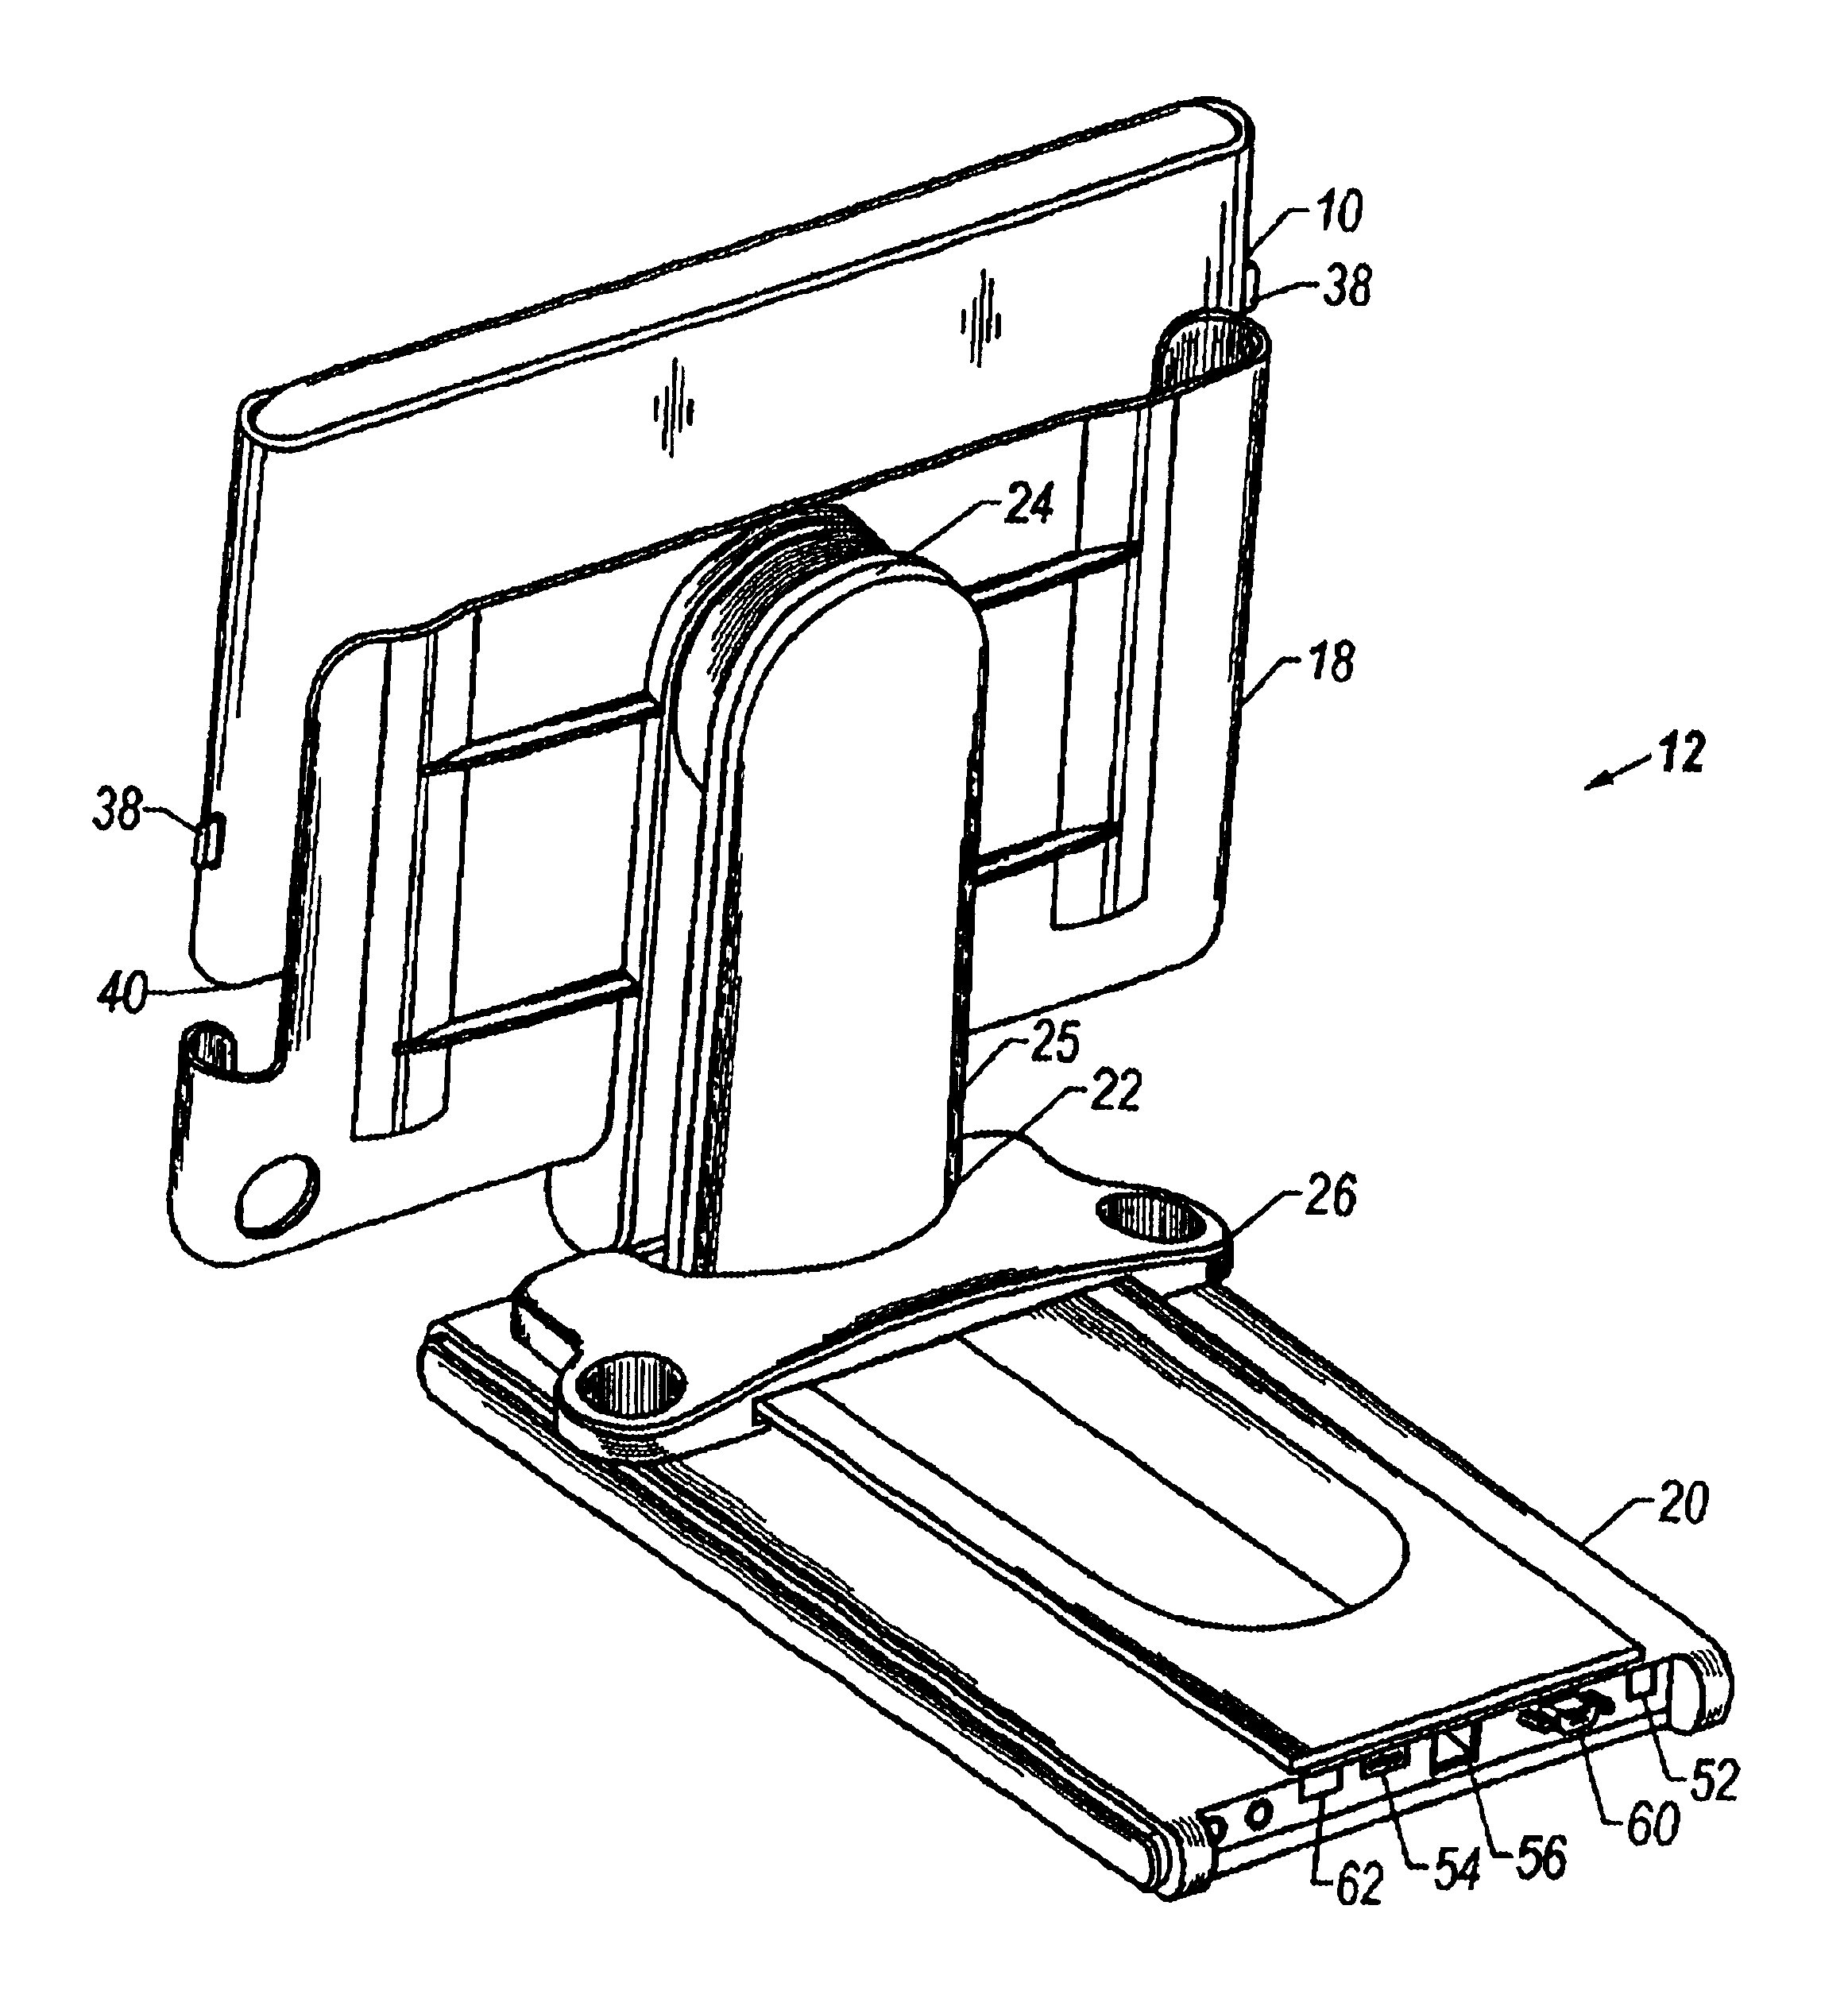 Tablet computing device with three-dimensional docking support